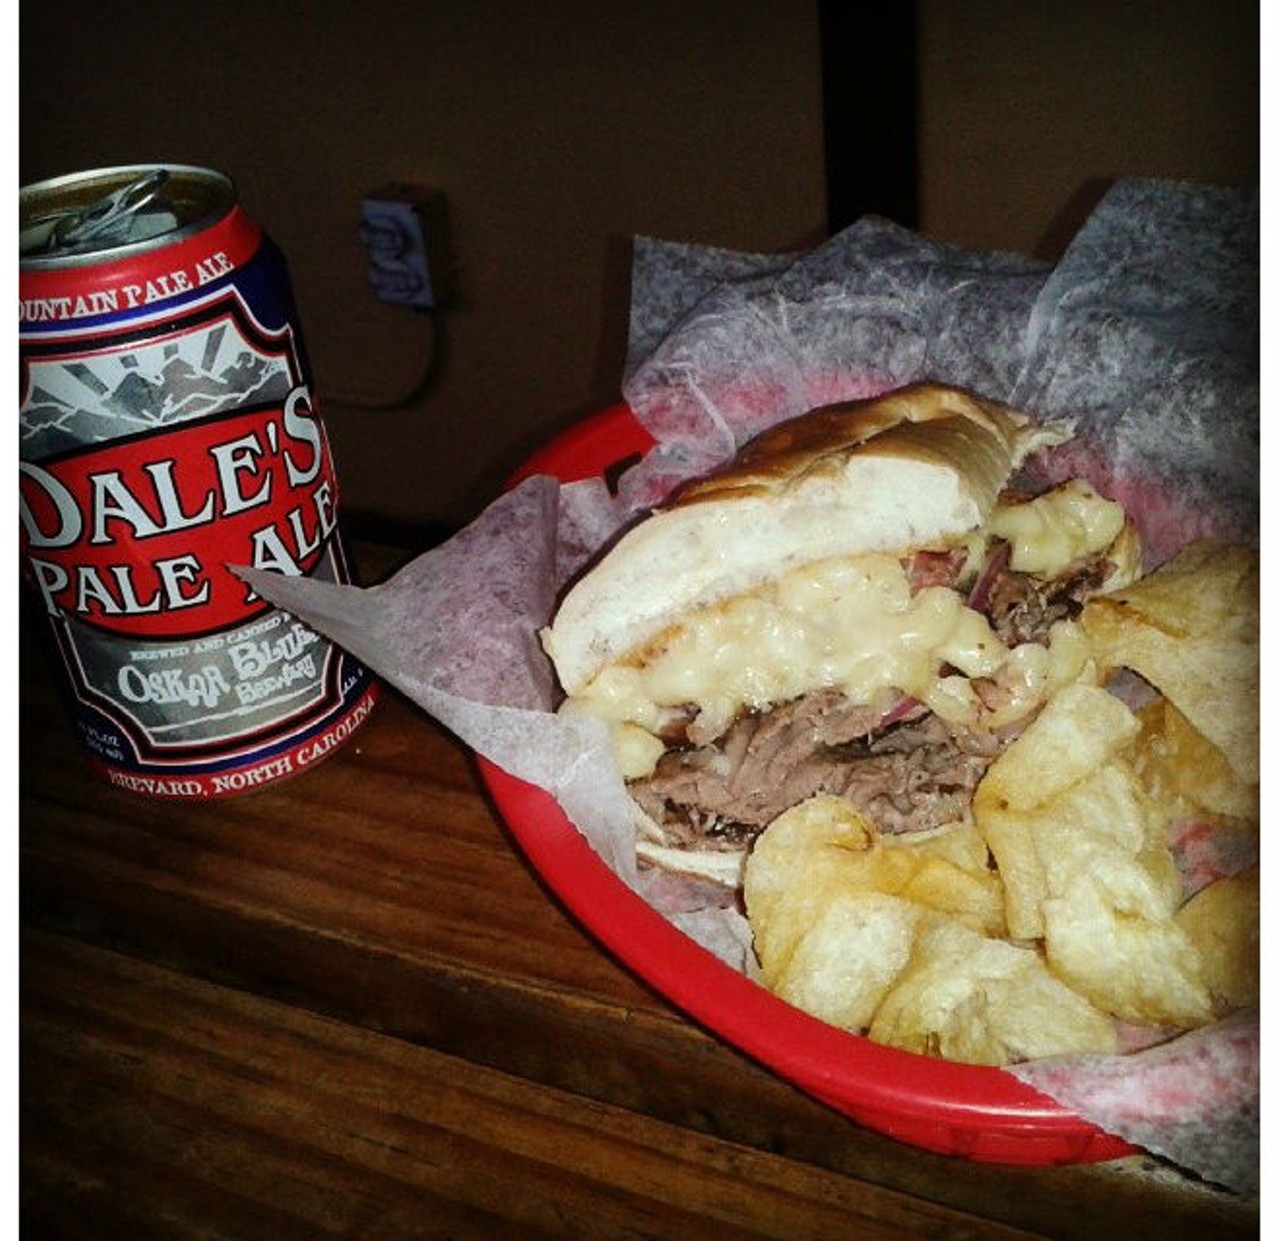 A classic: brisket bacon sandwich from The Gnarly Barley (via Instagram user @scrapplepie)